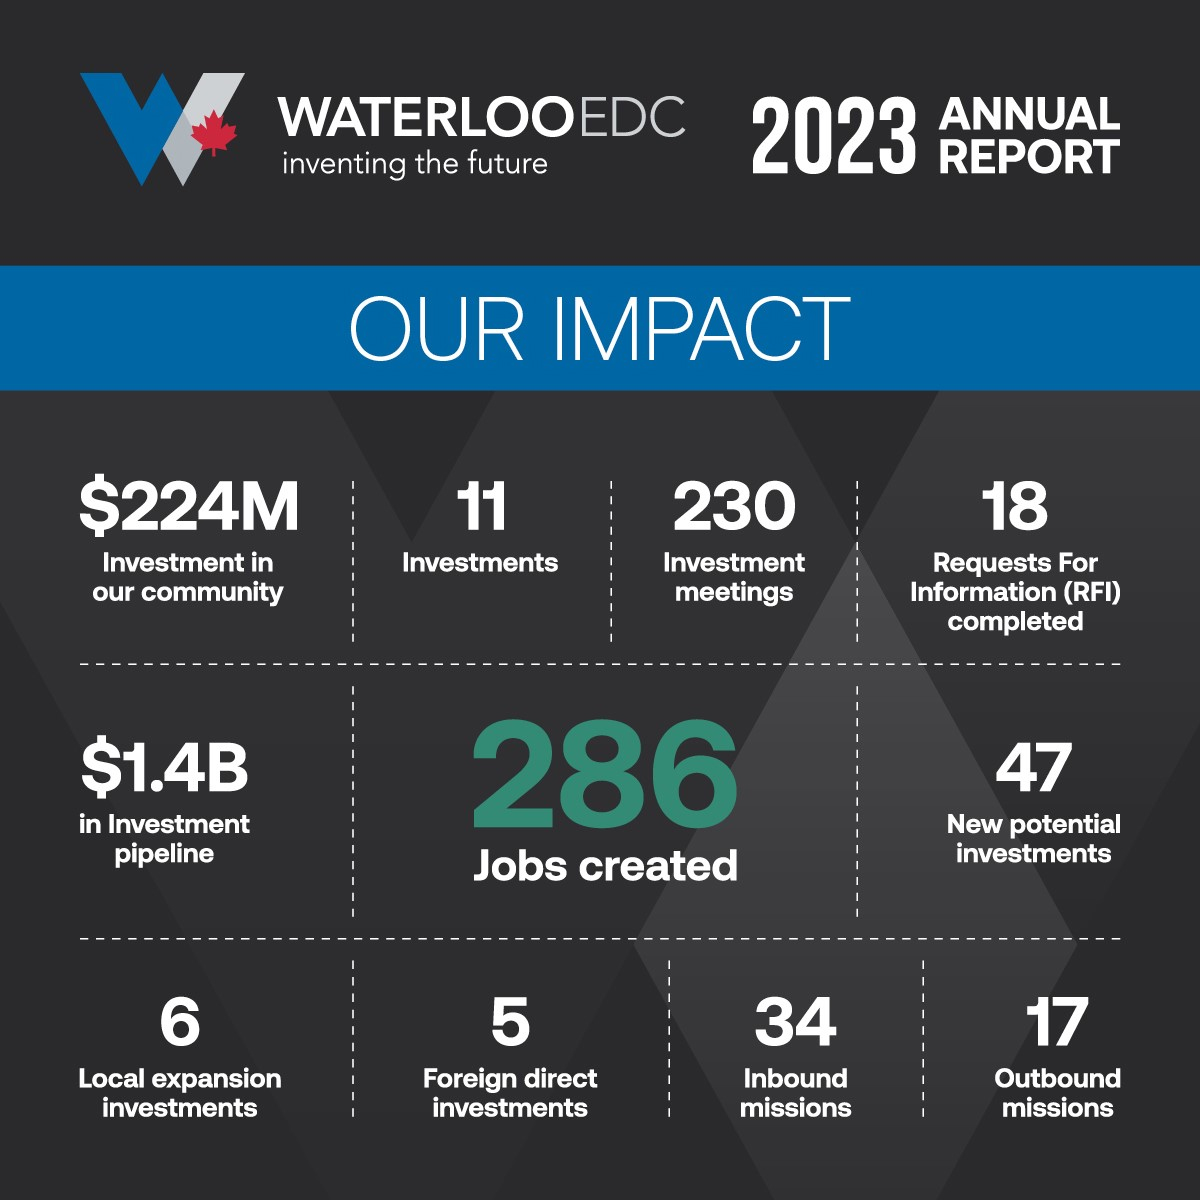 In 2023, Waterloo EDC attracted $224M in investment to #WaterlooRegion, creating 286 jobs. Thanks to our hard-working team and support from our partners, we're preparing to say 'yes' to even more investments in 2024. Download our 2023 Annual Report: hubs.ly/Q02vSNcb0